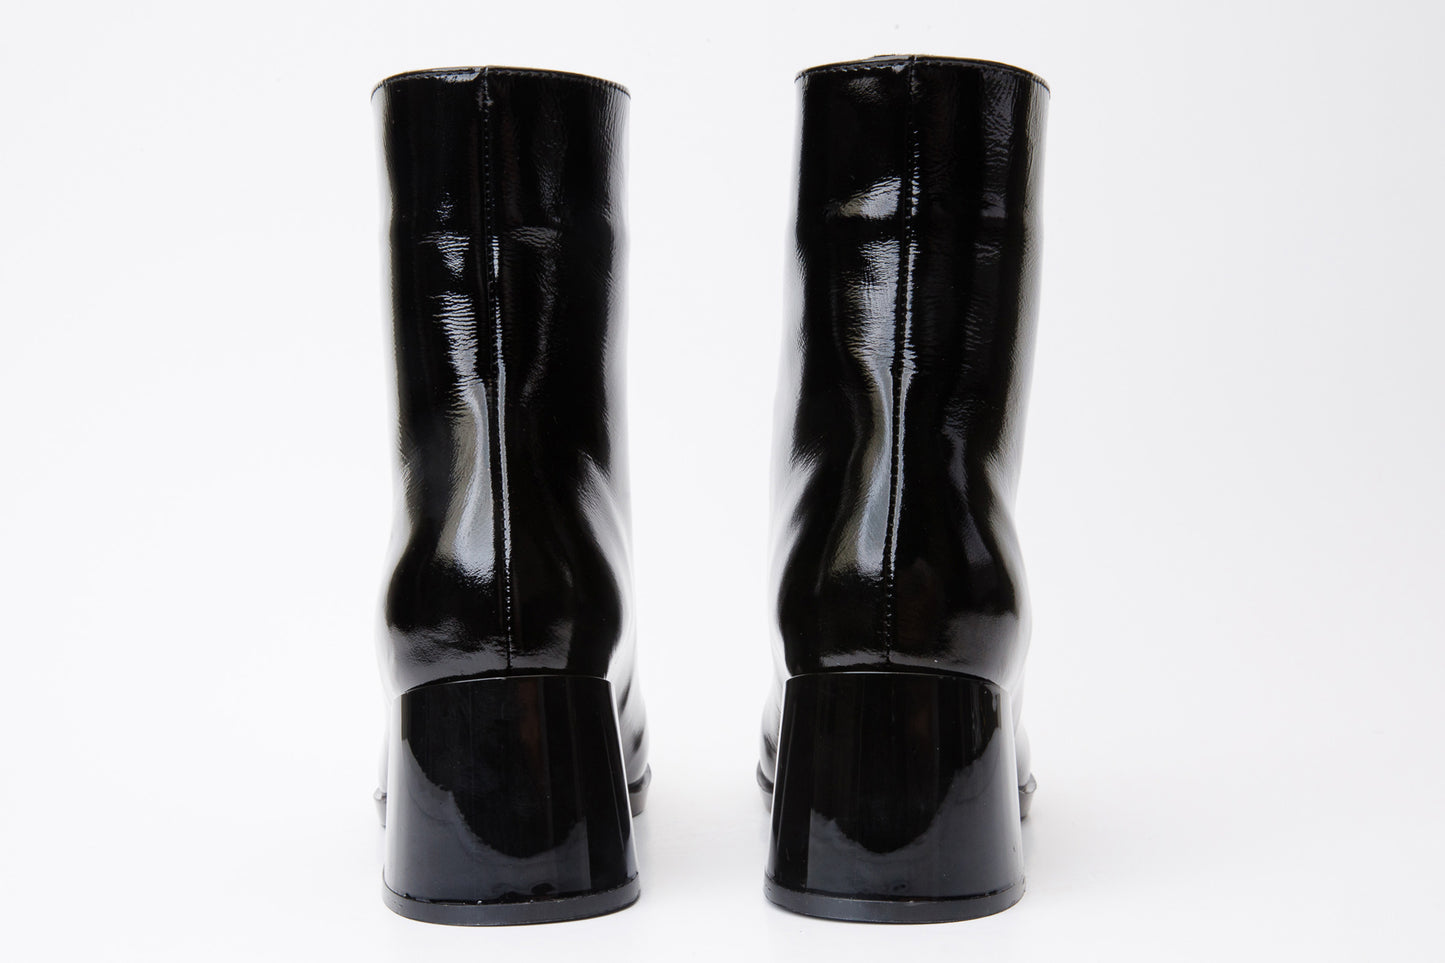 The Tackle Black Patent Leather Block Heel Women Boot